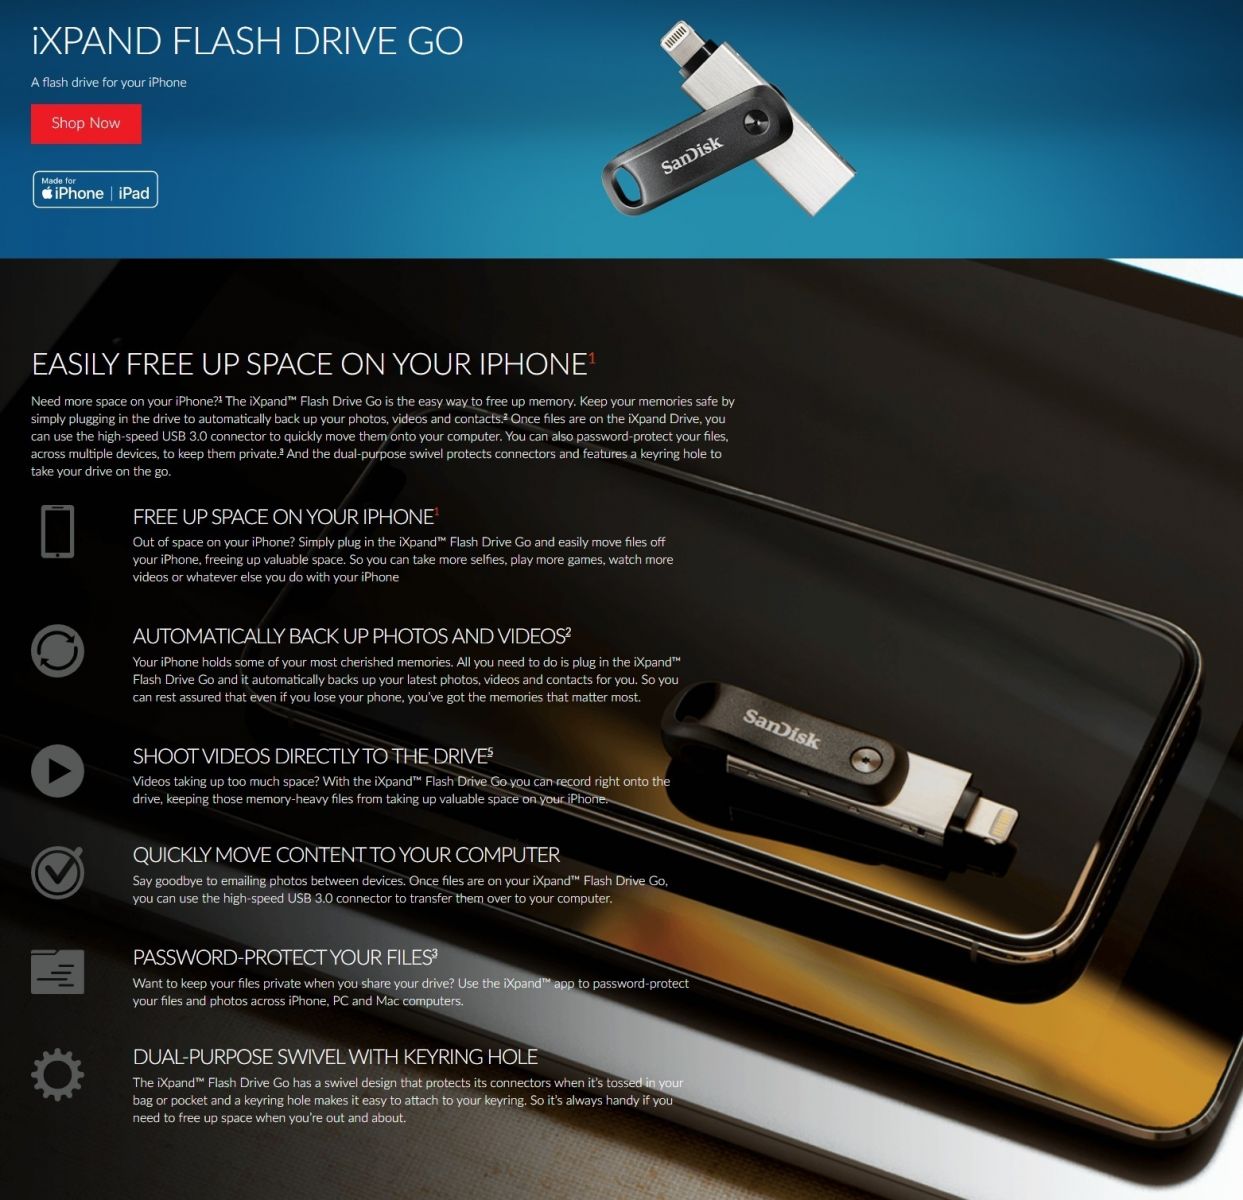 SanDisk 128GB iXpand Flash Drive Go for iPhone and iPad - SDIX60N